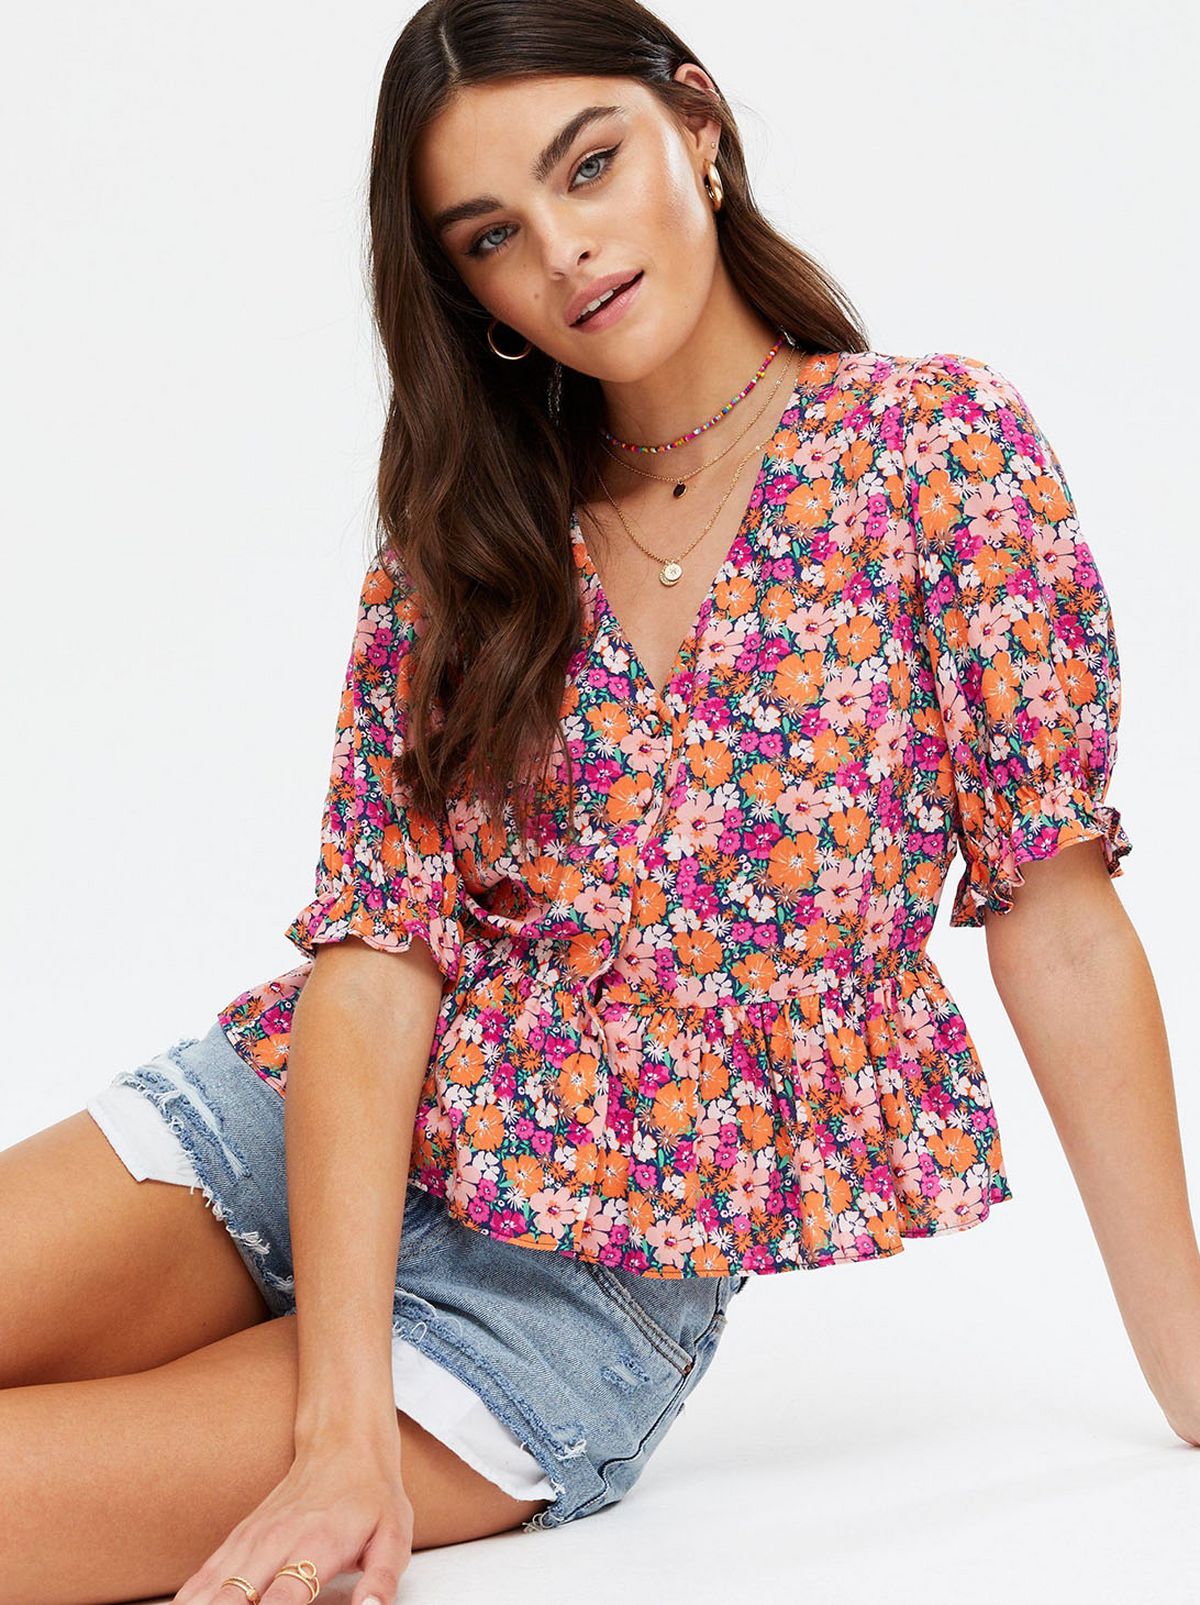 9 Summer Tops That Are Guaranteed to Make You Feel Good